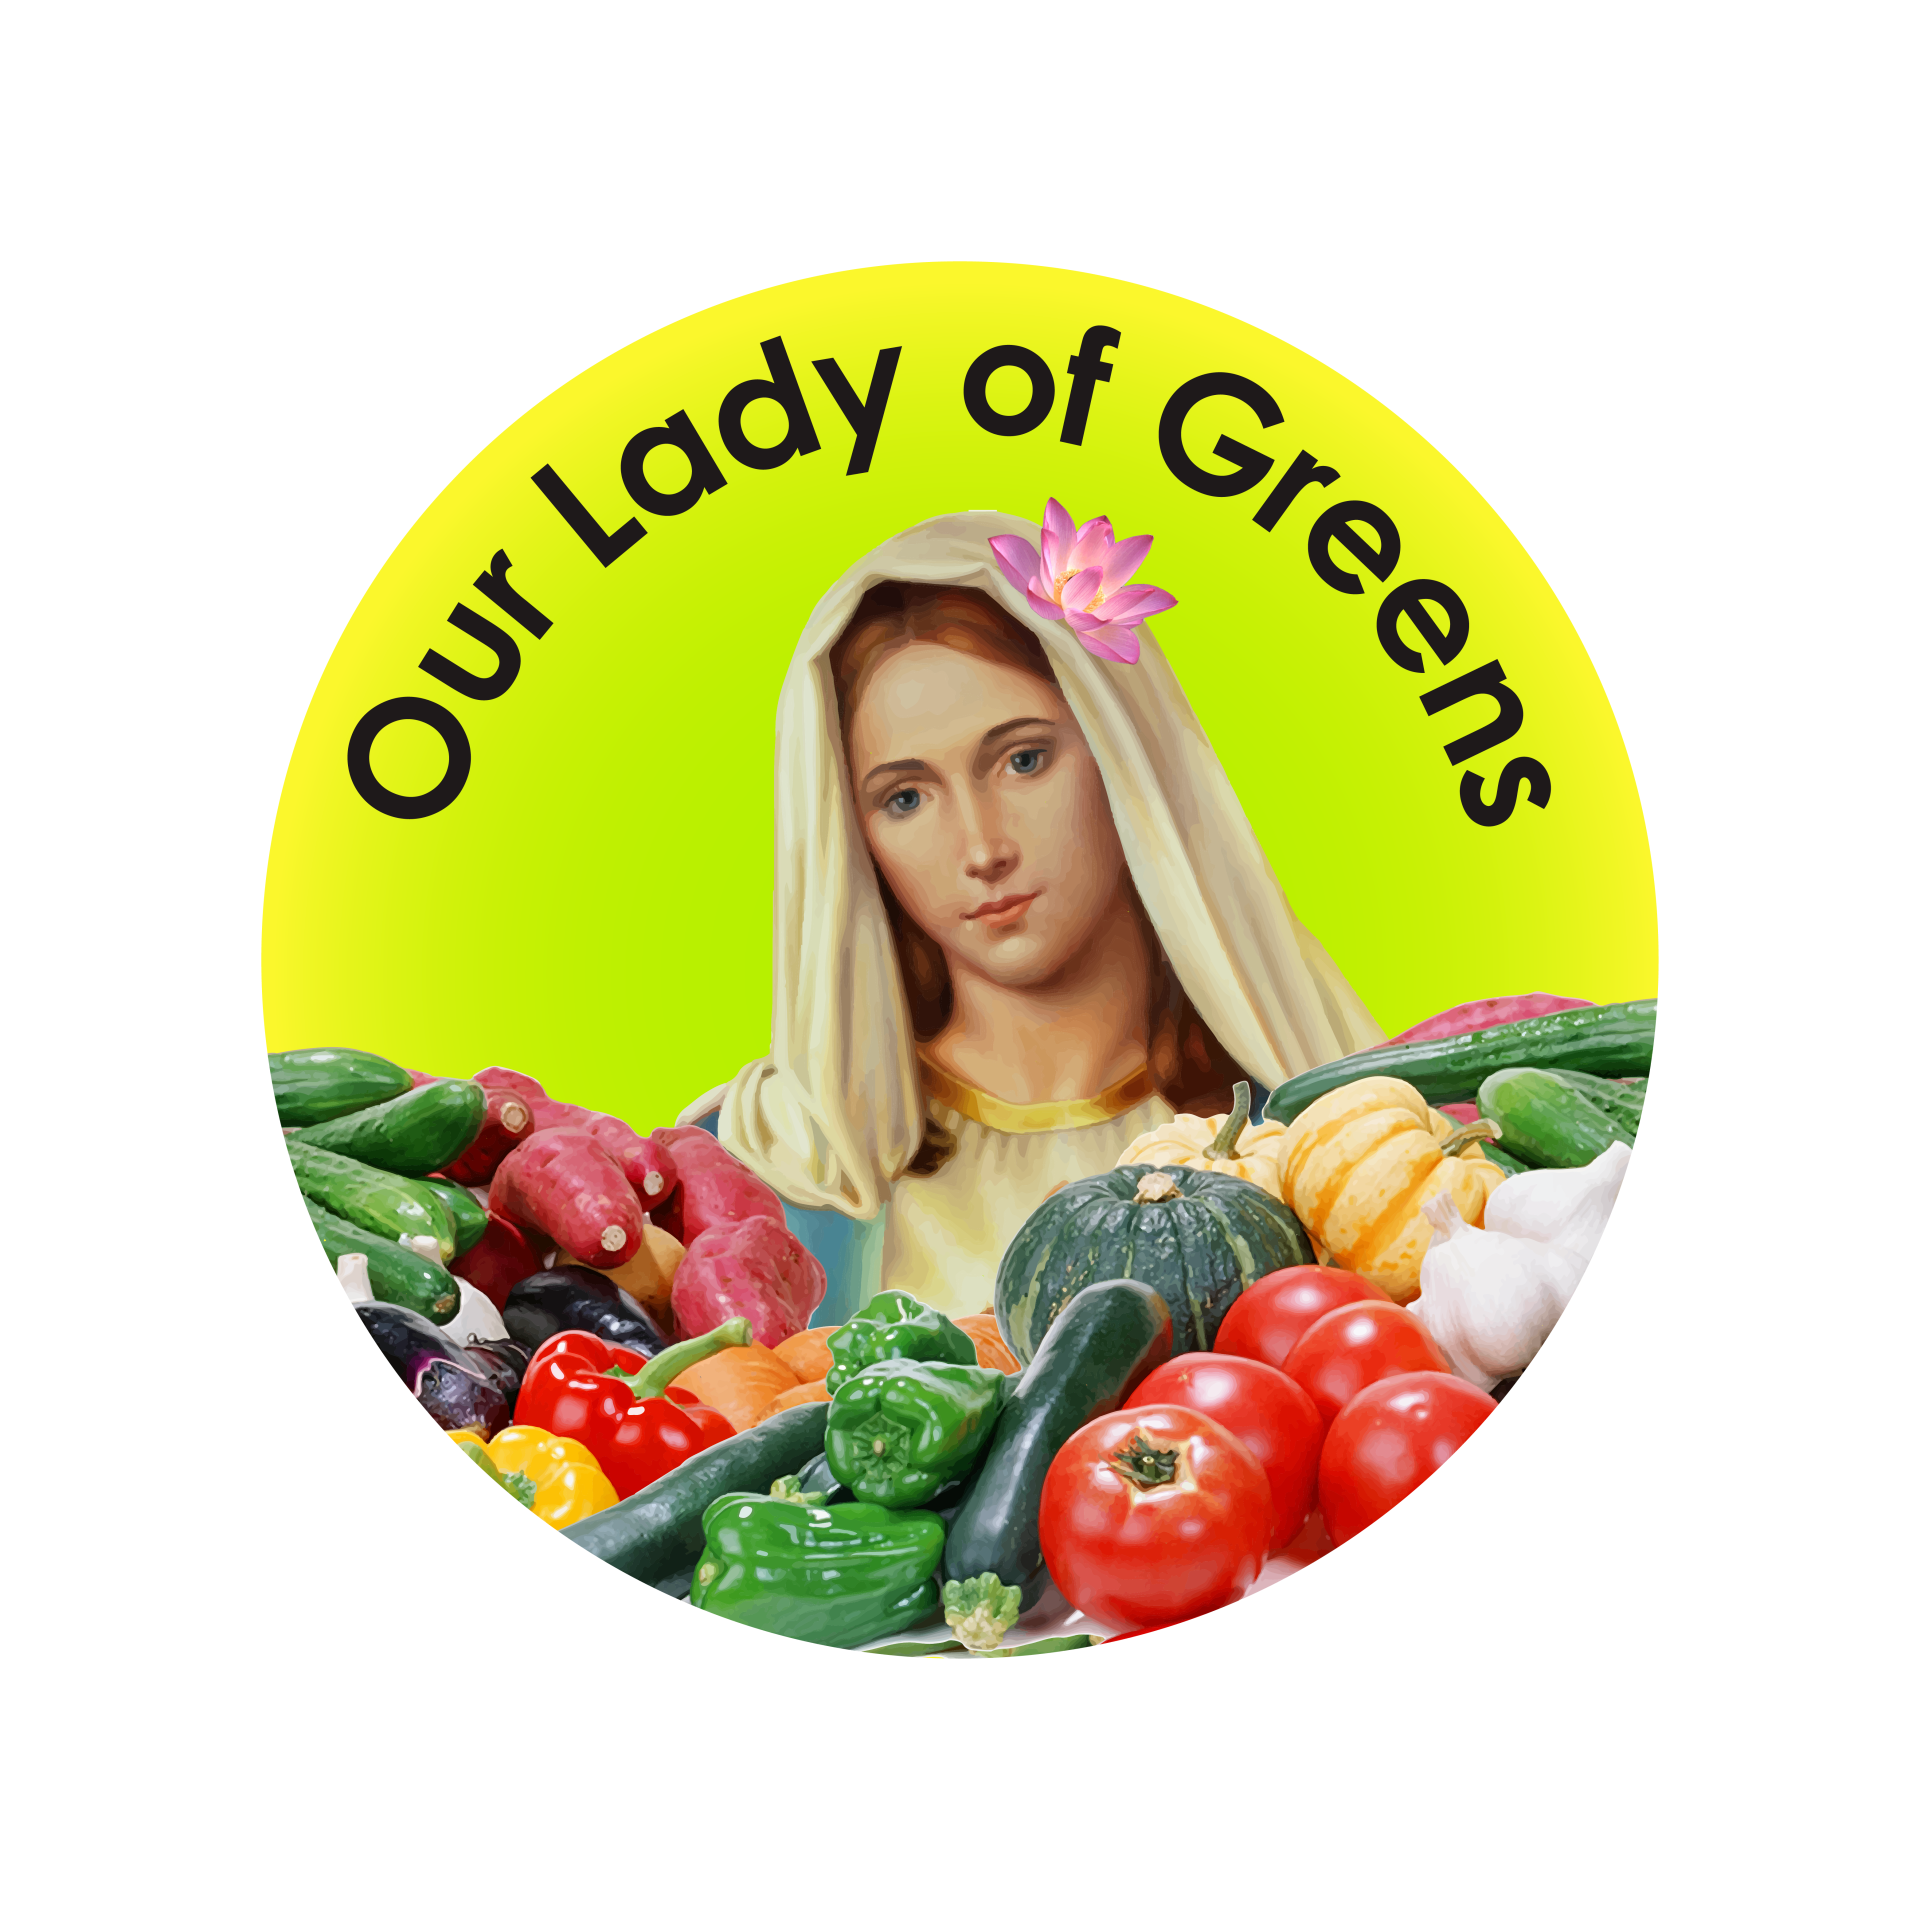 Our Lady of Greens